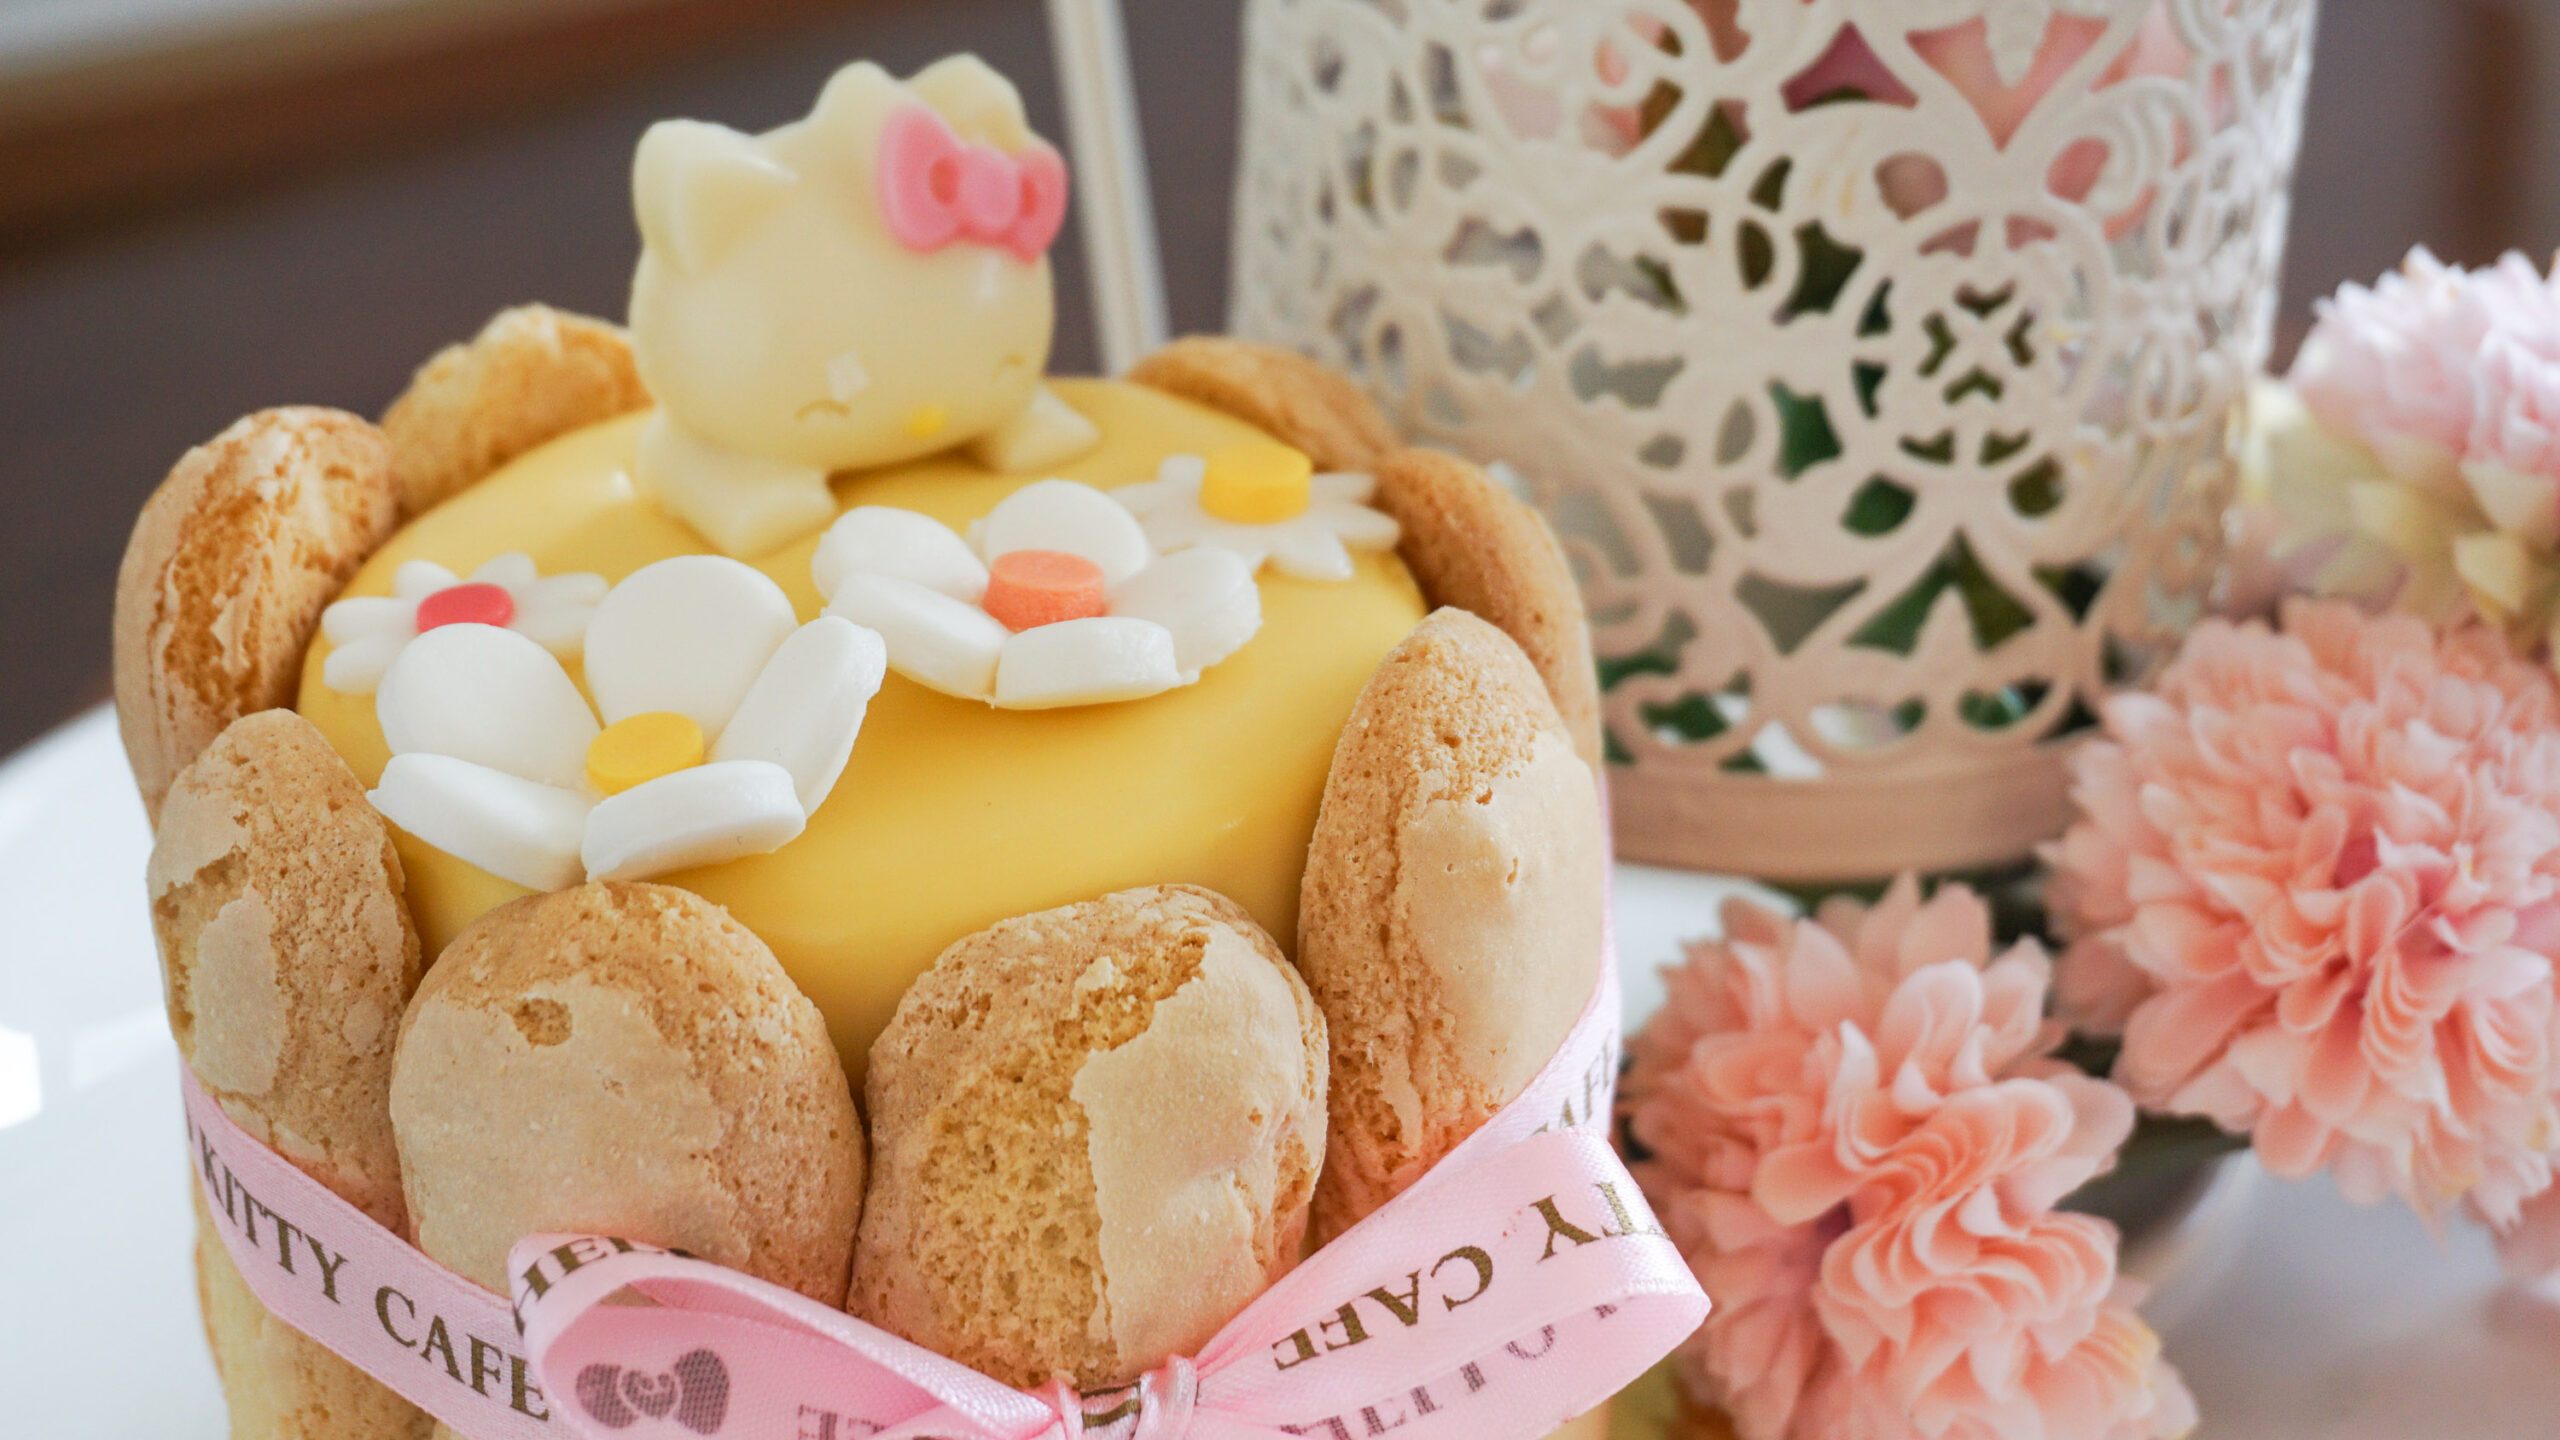 WATCH: Manila’s first Hello Kitty Cafe is both pretty and yummy